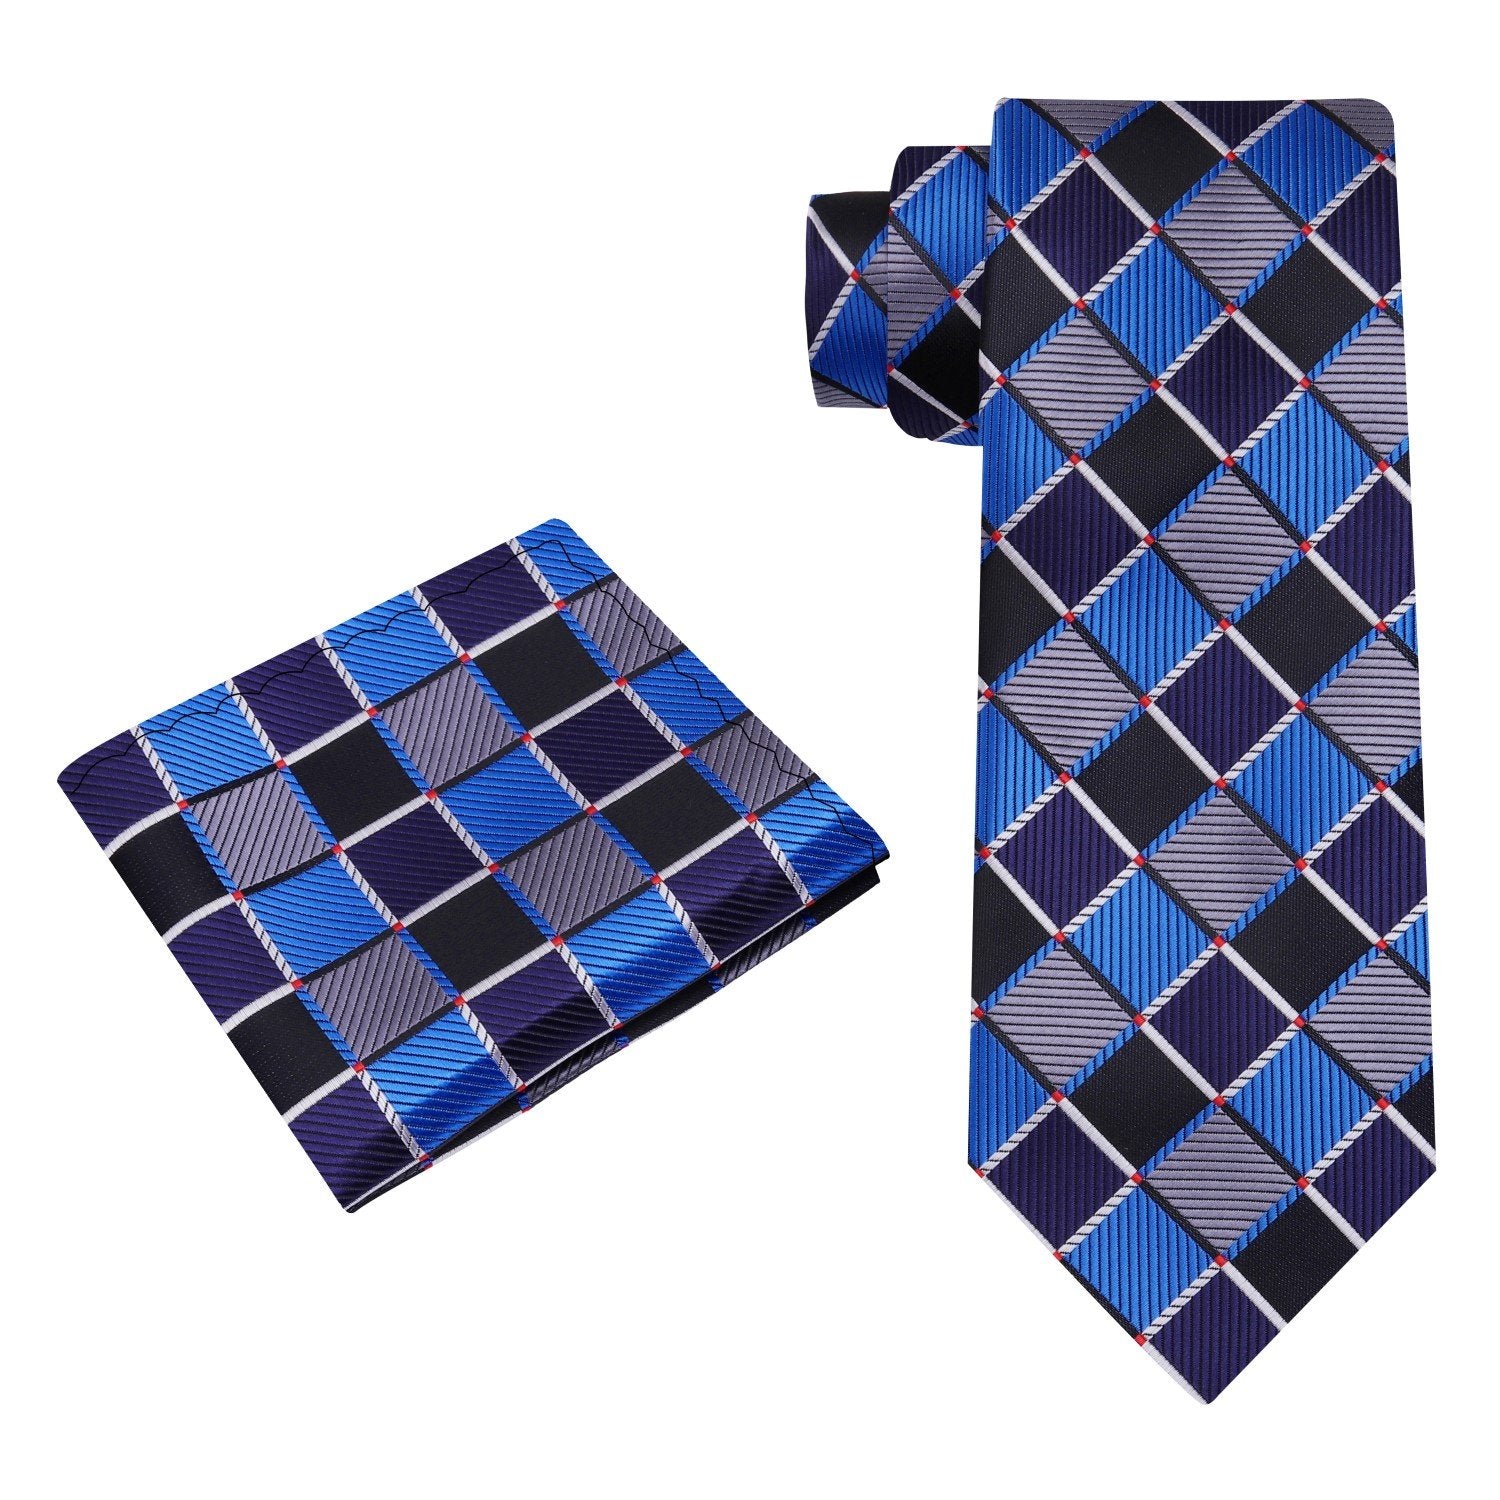 Alt View: A Grey, Black, Blue Geometric Check Pattern Necktie With Matching Pocket Square